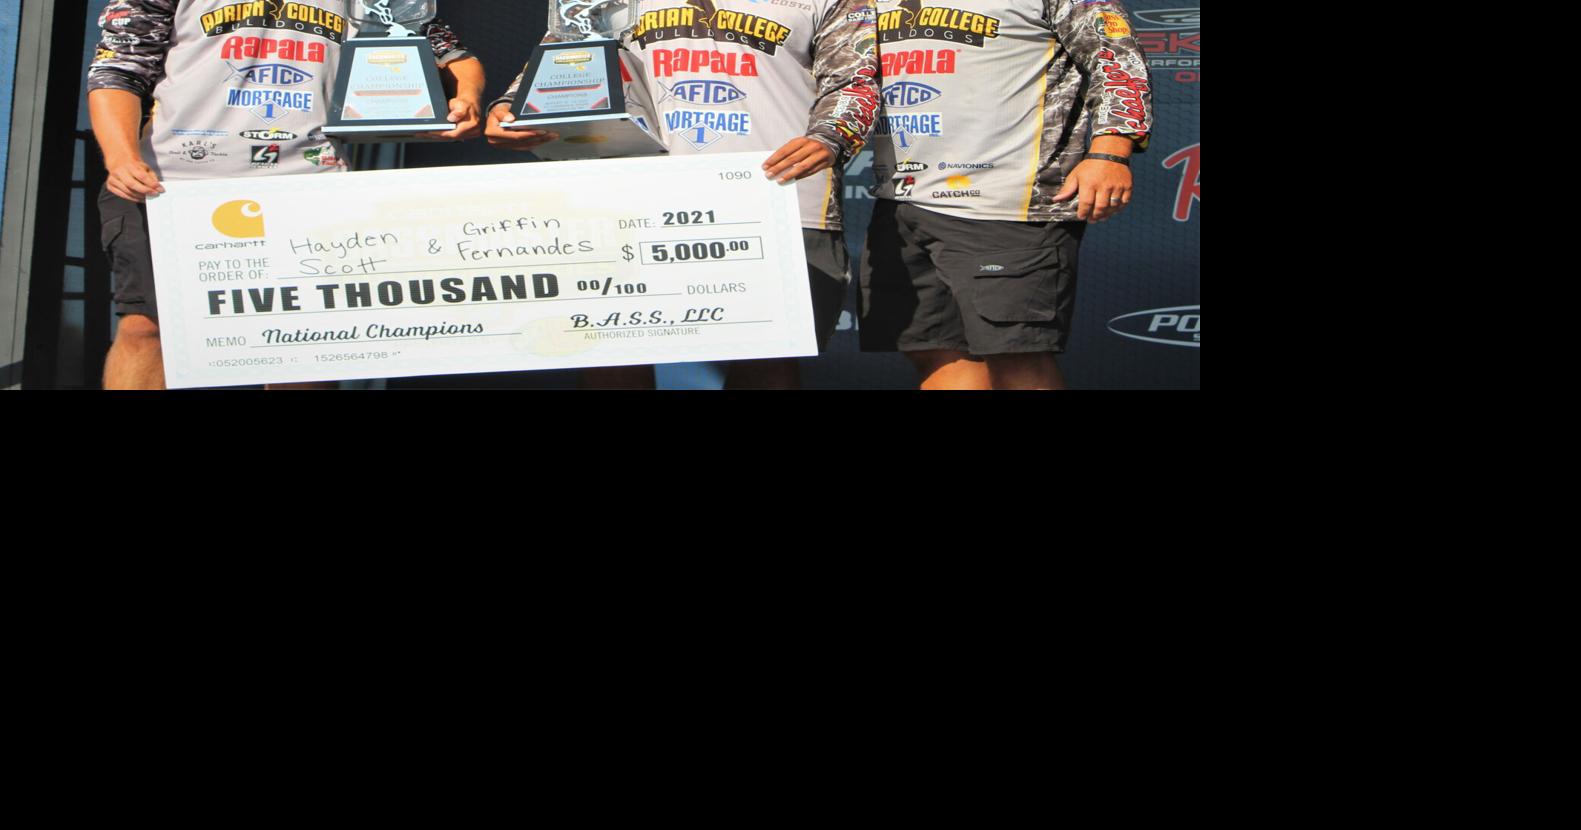 Adrian College duo wins bass fishing competition